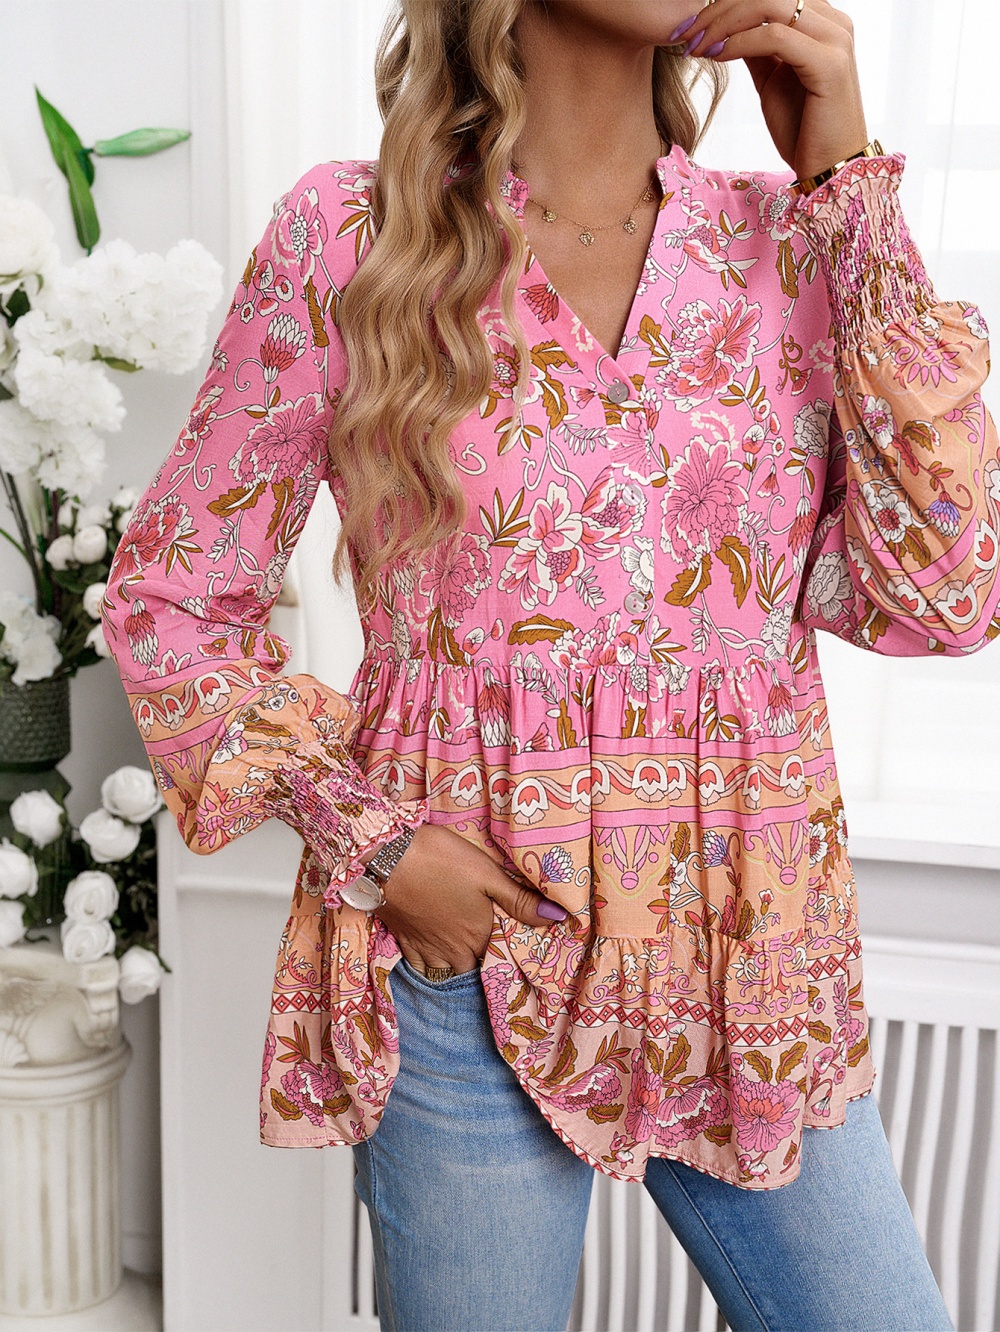 Printing Casual long sleeve vacation shirt for women